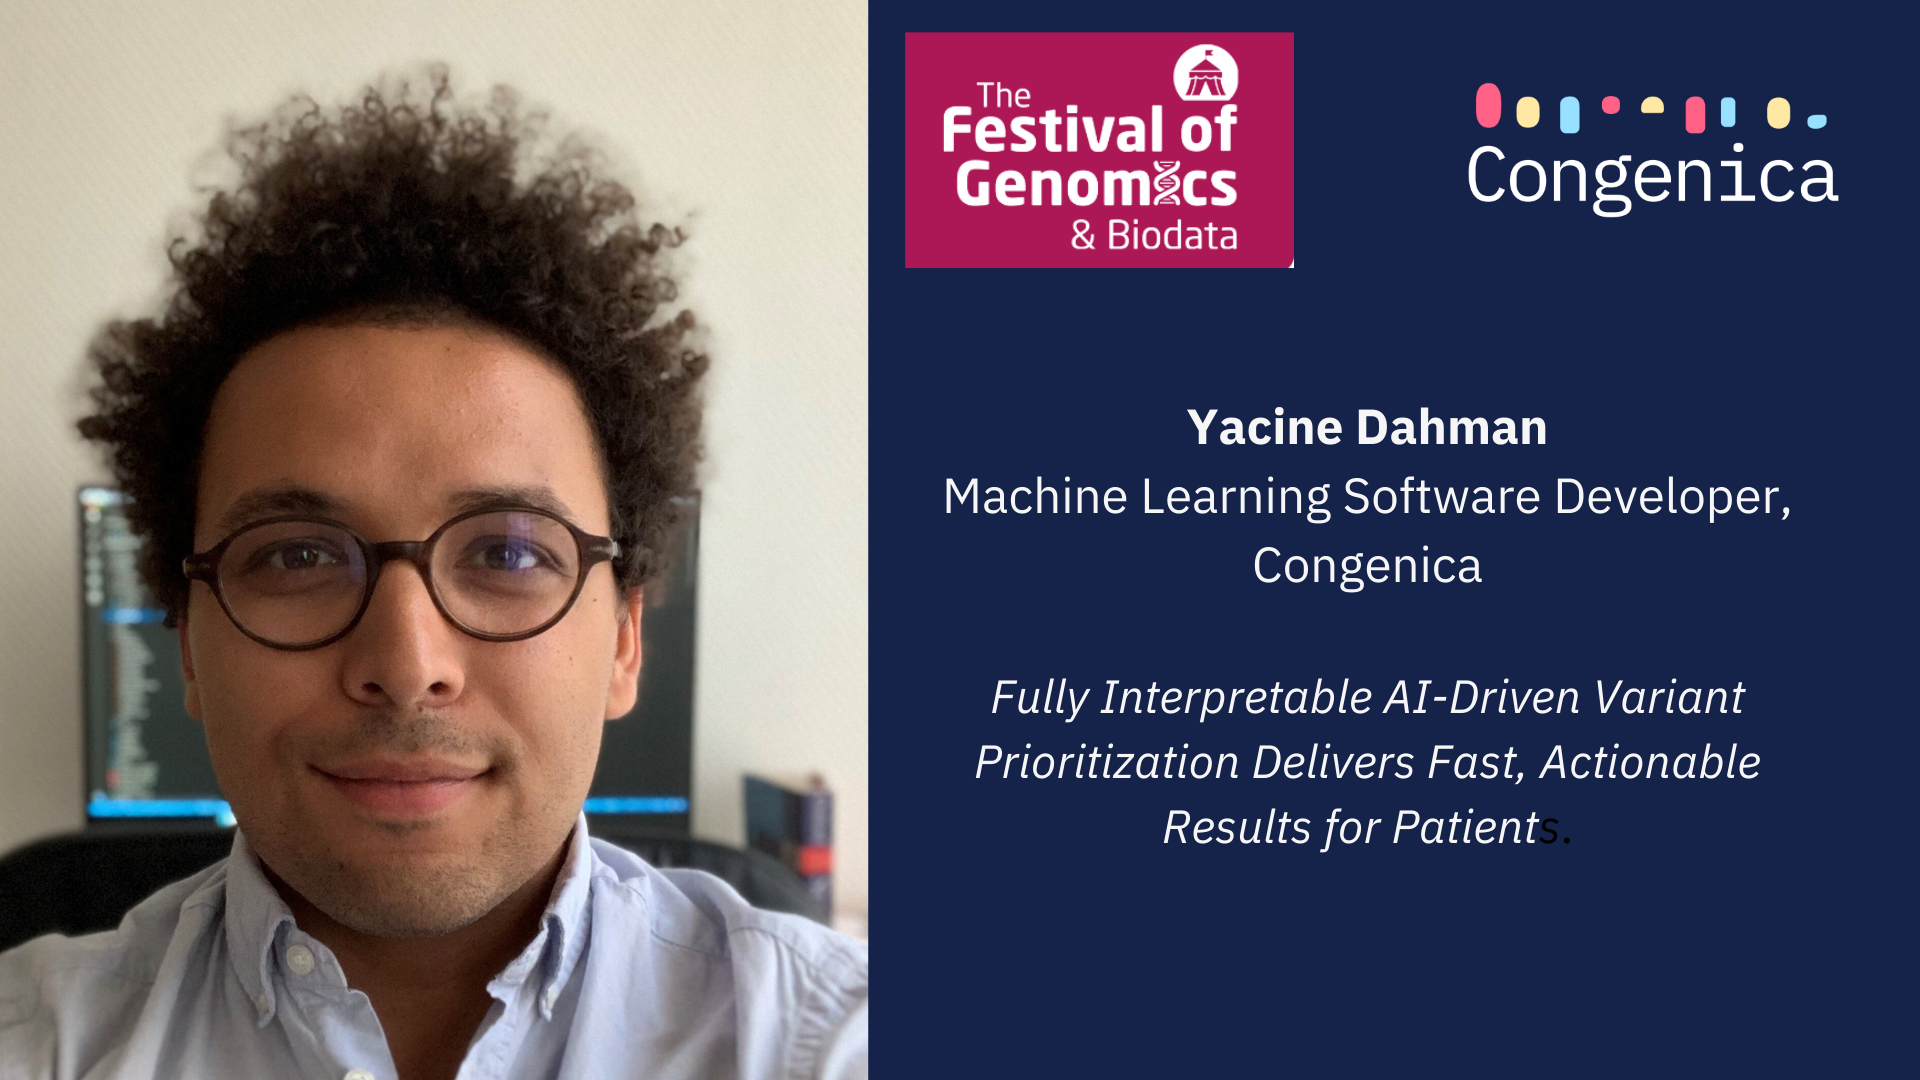 Yacine Dahman Machine Learning Software Developer at Congenica Fully Interpretable AI-Driven Variant Prioritization Delivers Fast, Actionable Results for Patients_.